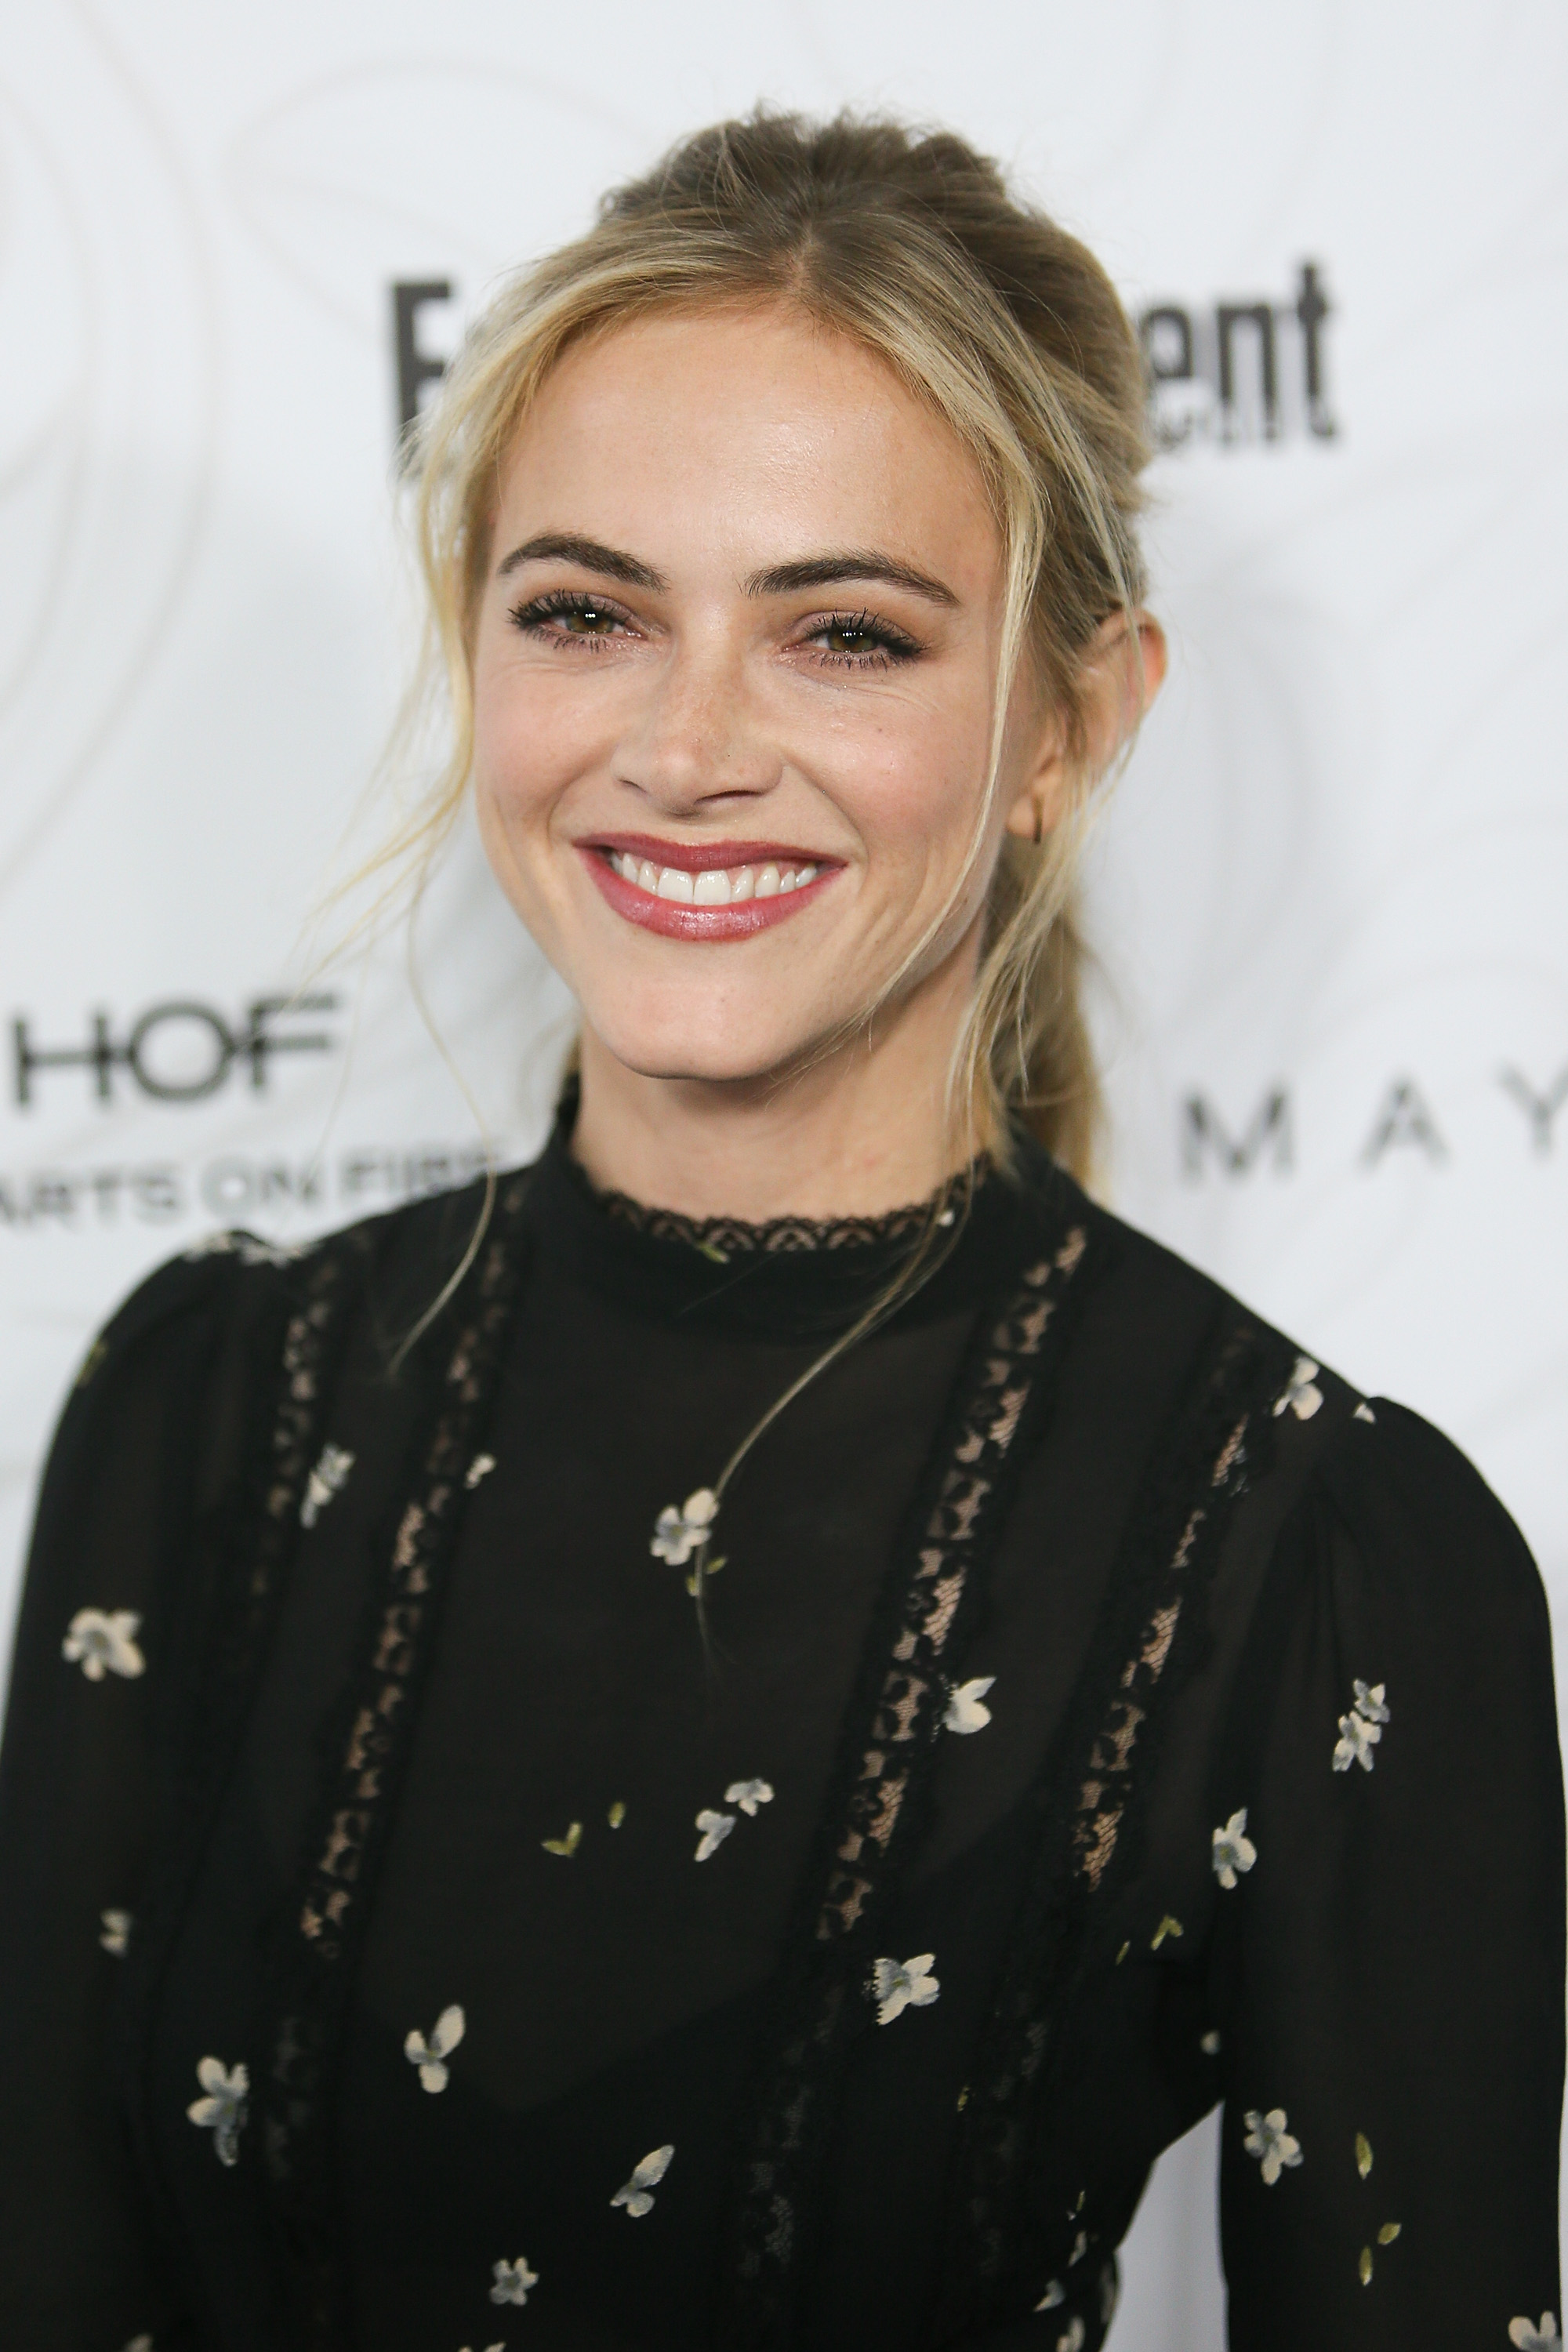 Emily Wickersham at the Entertainment Weekly celebration honoring nominees for The Screen Actors Guild Awards in Los Angeles, California on January 28, 2017 | Source: Getty Images